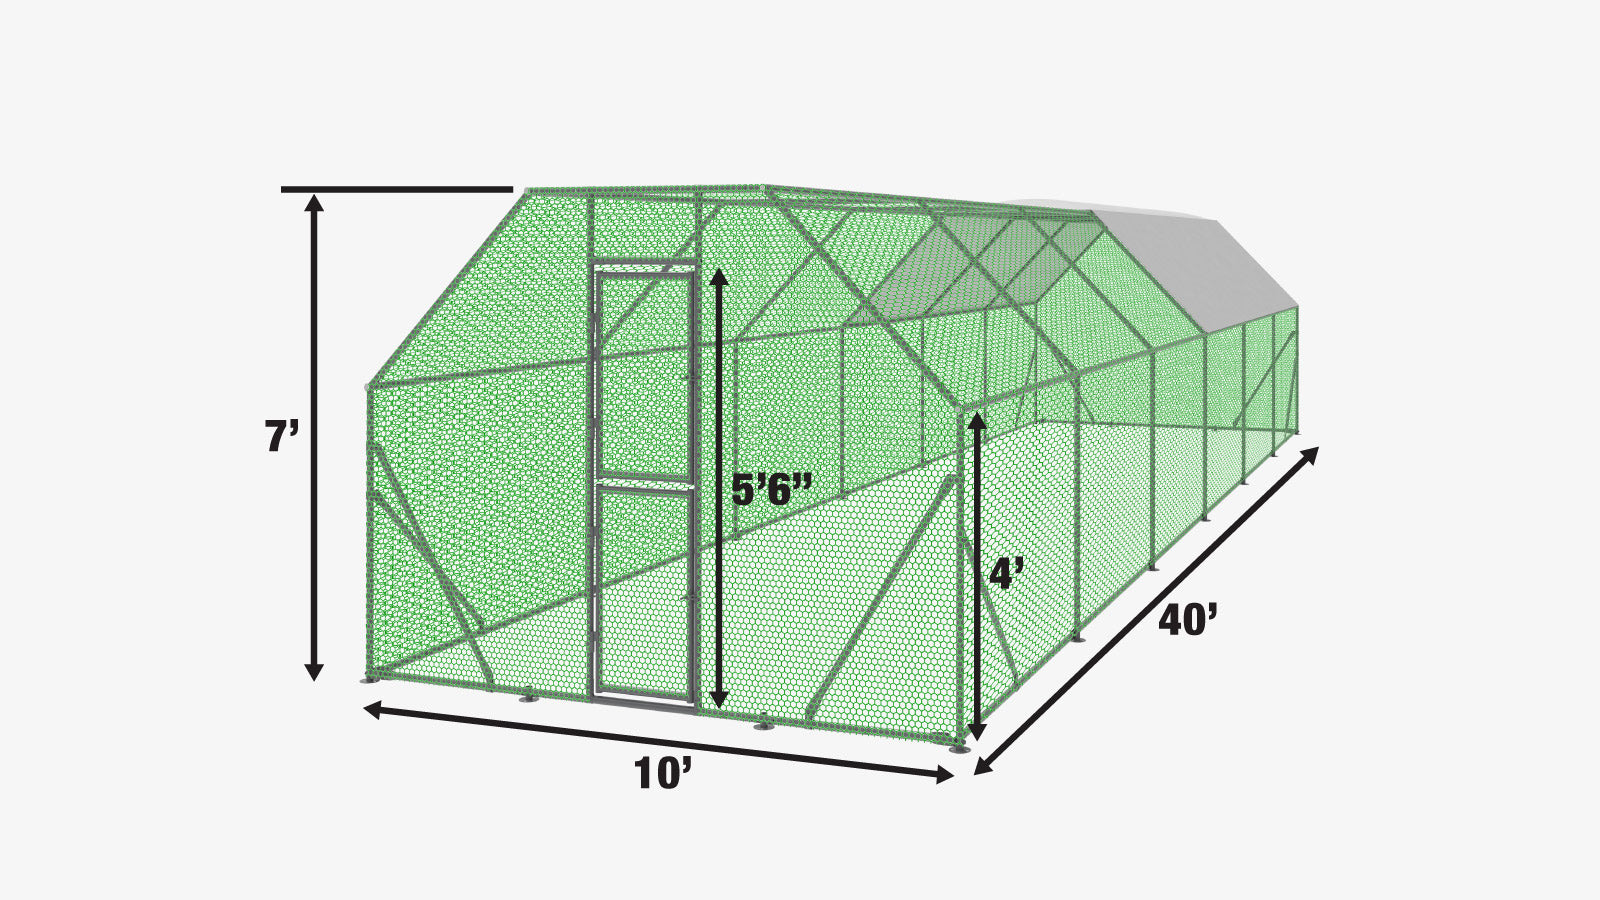 TMG Industrial 10' x 40' Wire Mesh Chicken Run Shelter Coop, Acier Galvanisé, 400 Sq-Ft, Verrouillable Gate, PVC Coated Mesh, TMG-CRS1040-specifications-image